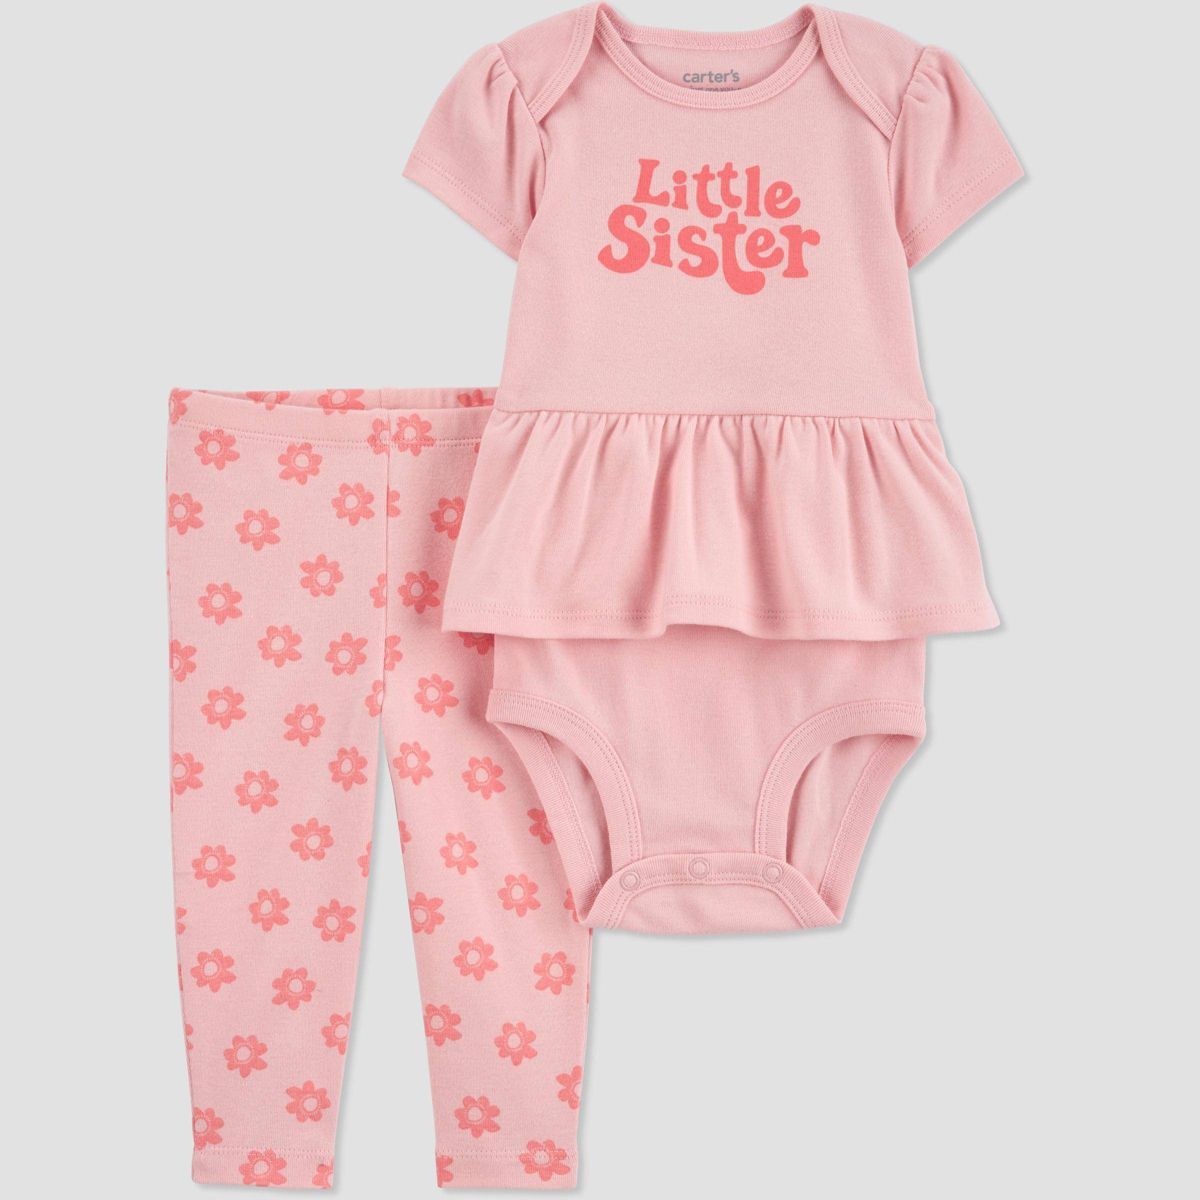 Carter's Just One You®️ Baby 2pc Family Love Little Sister Top & Bottom Set - Pink | Target